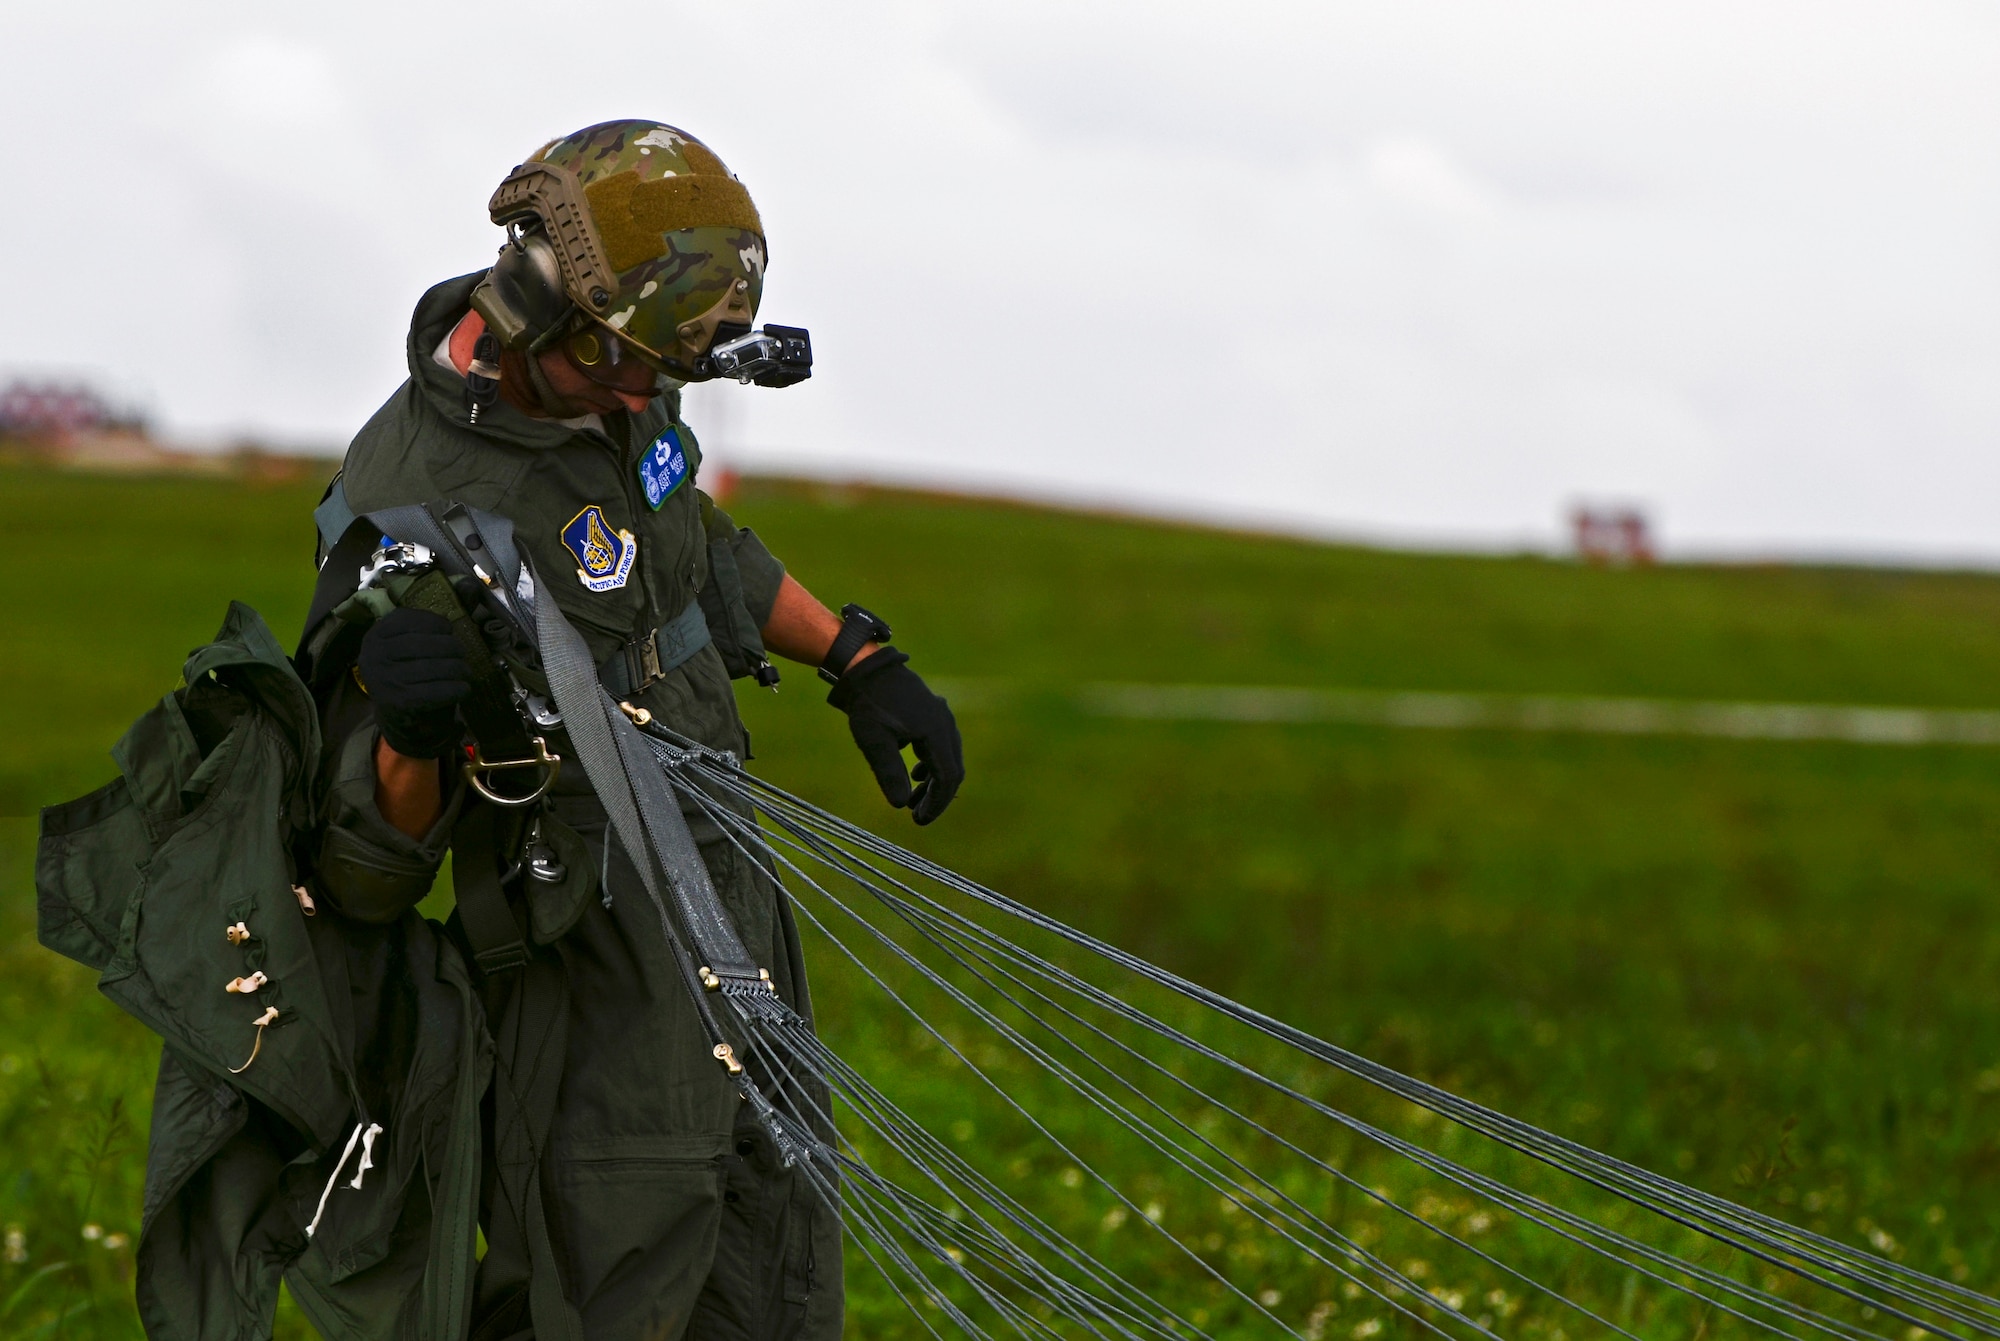 Staff Sgt. Stephen Baker, 736th Security Forces Squadron parachute program manager, stands up Aug.21, 2013 after landing on the drop zone during static line jump training on Andersen Air Force Base, Guam. Air Force static line capability falls under the personnel parachute program. Jumpers are first qualified during a three-week long basic airborne course at Ft. Benning, Ga., and then continue to work on their jumping proficiency and qualifications after they return here. (U.S. Air Force photo by Airman 1st Class Marianique Santos/Released)